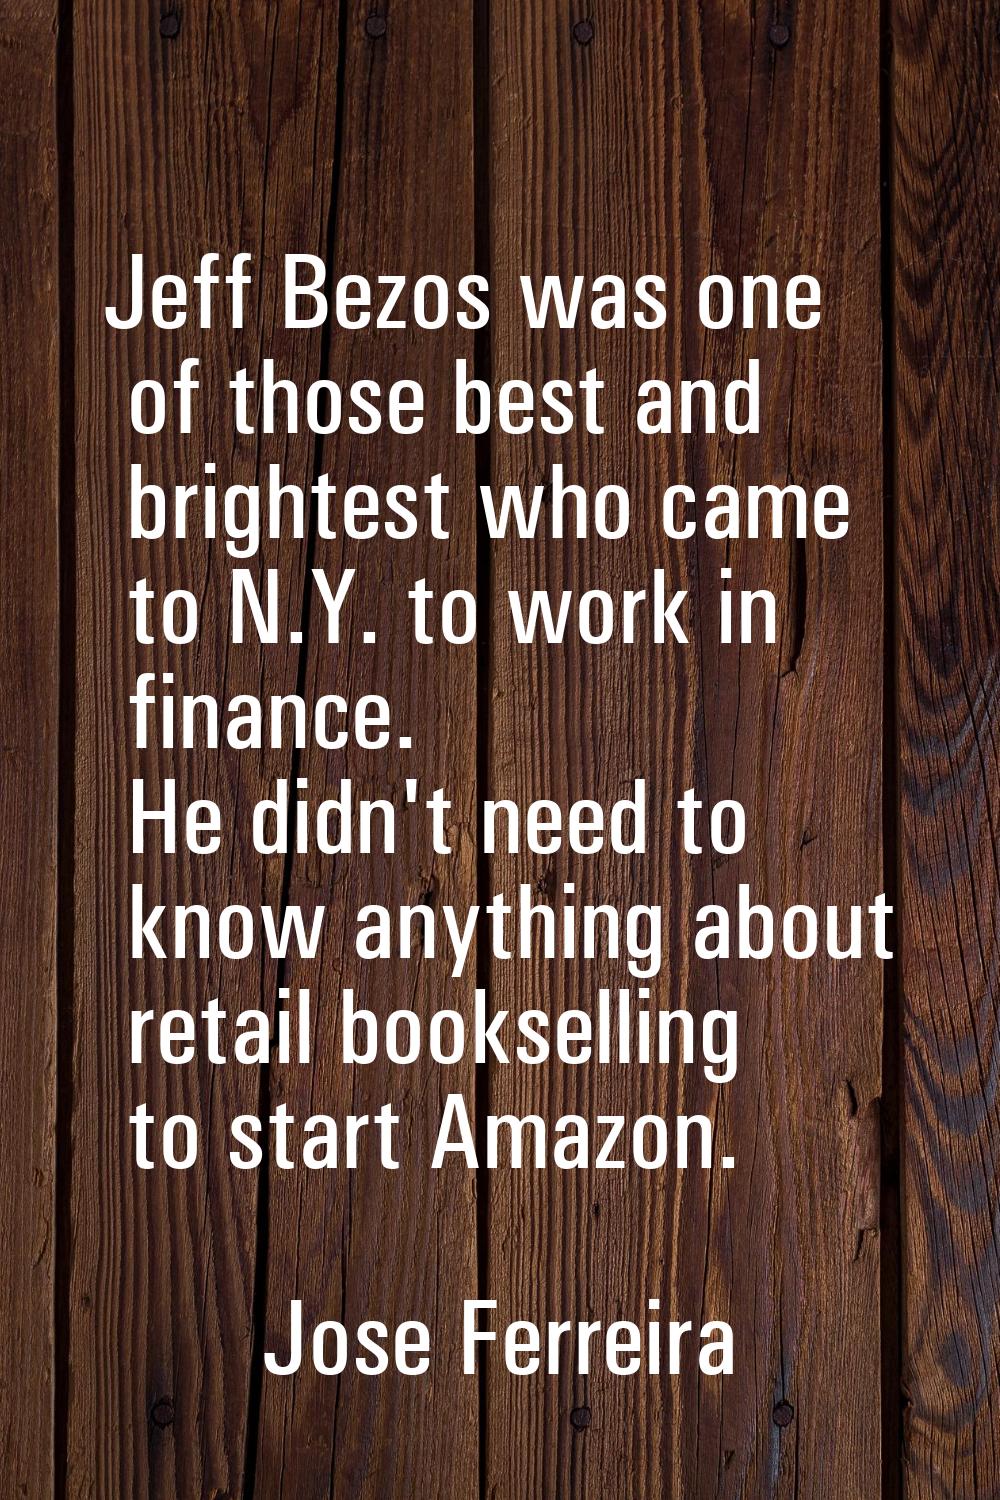 Jeff Bezos was one of those best and brightest who came to N.Y. to work in finance. He didn't need 